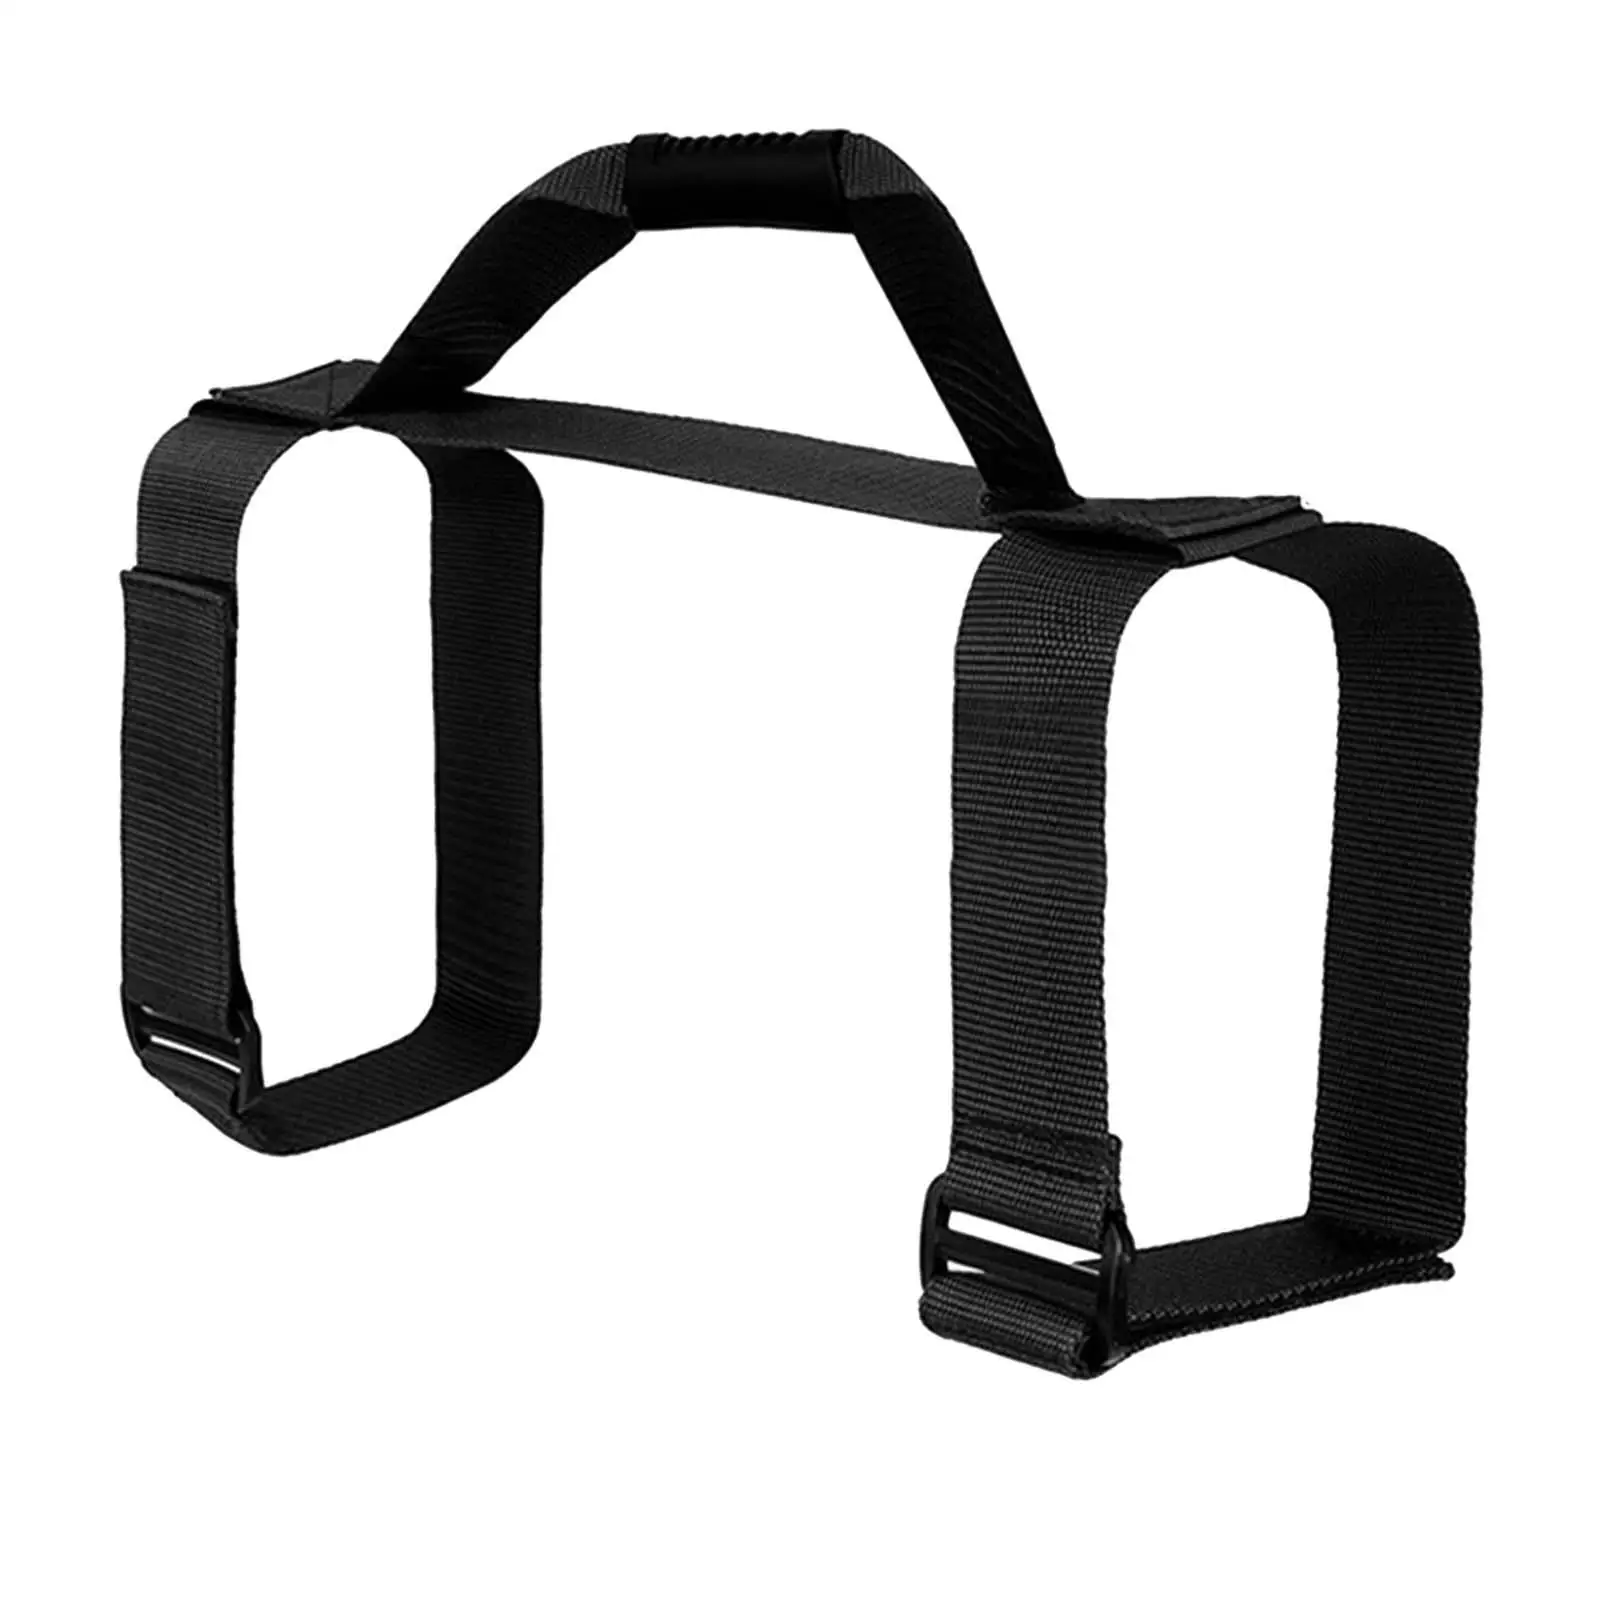 Scuba Tank Holder Non Slip Adjustable Dive Carrier Holder Strap with Handle Heavy Duty Scuba Air Tank Band for Truck